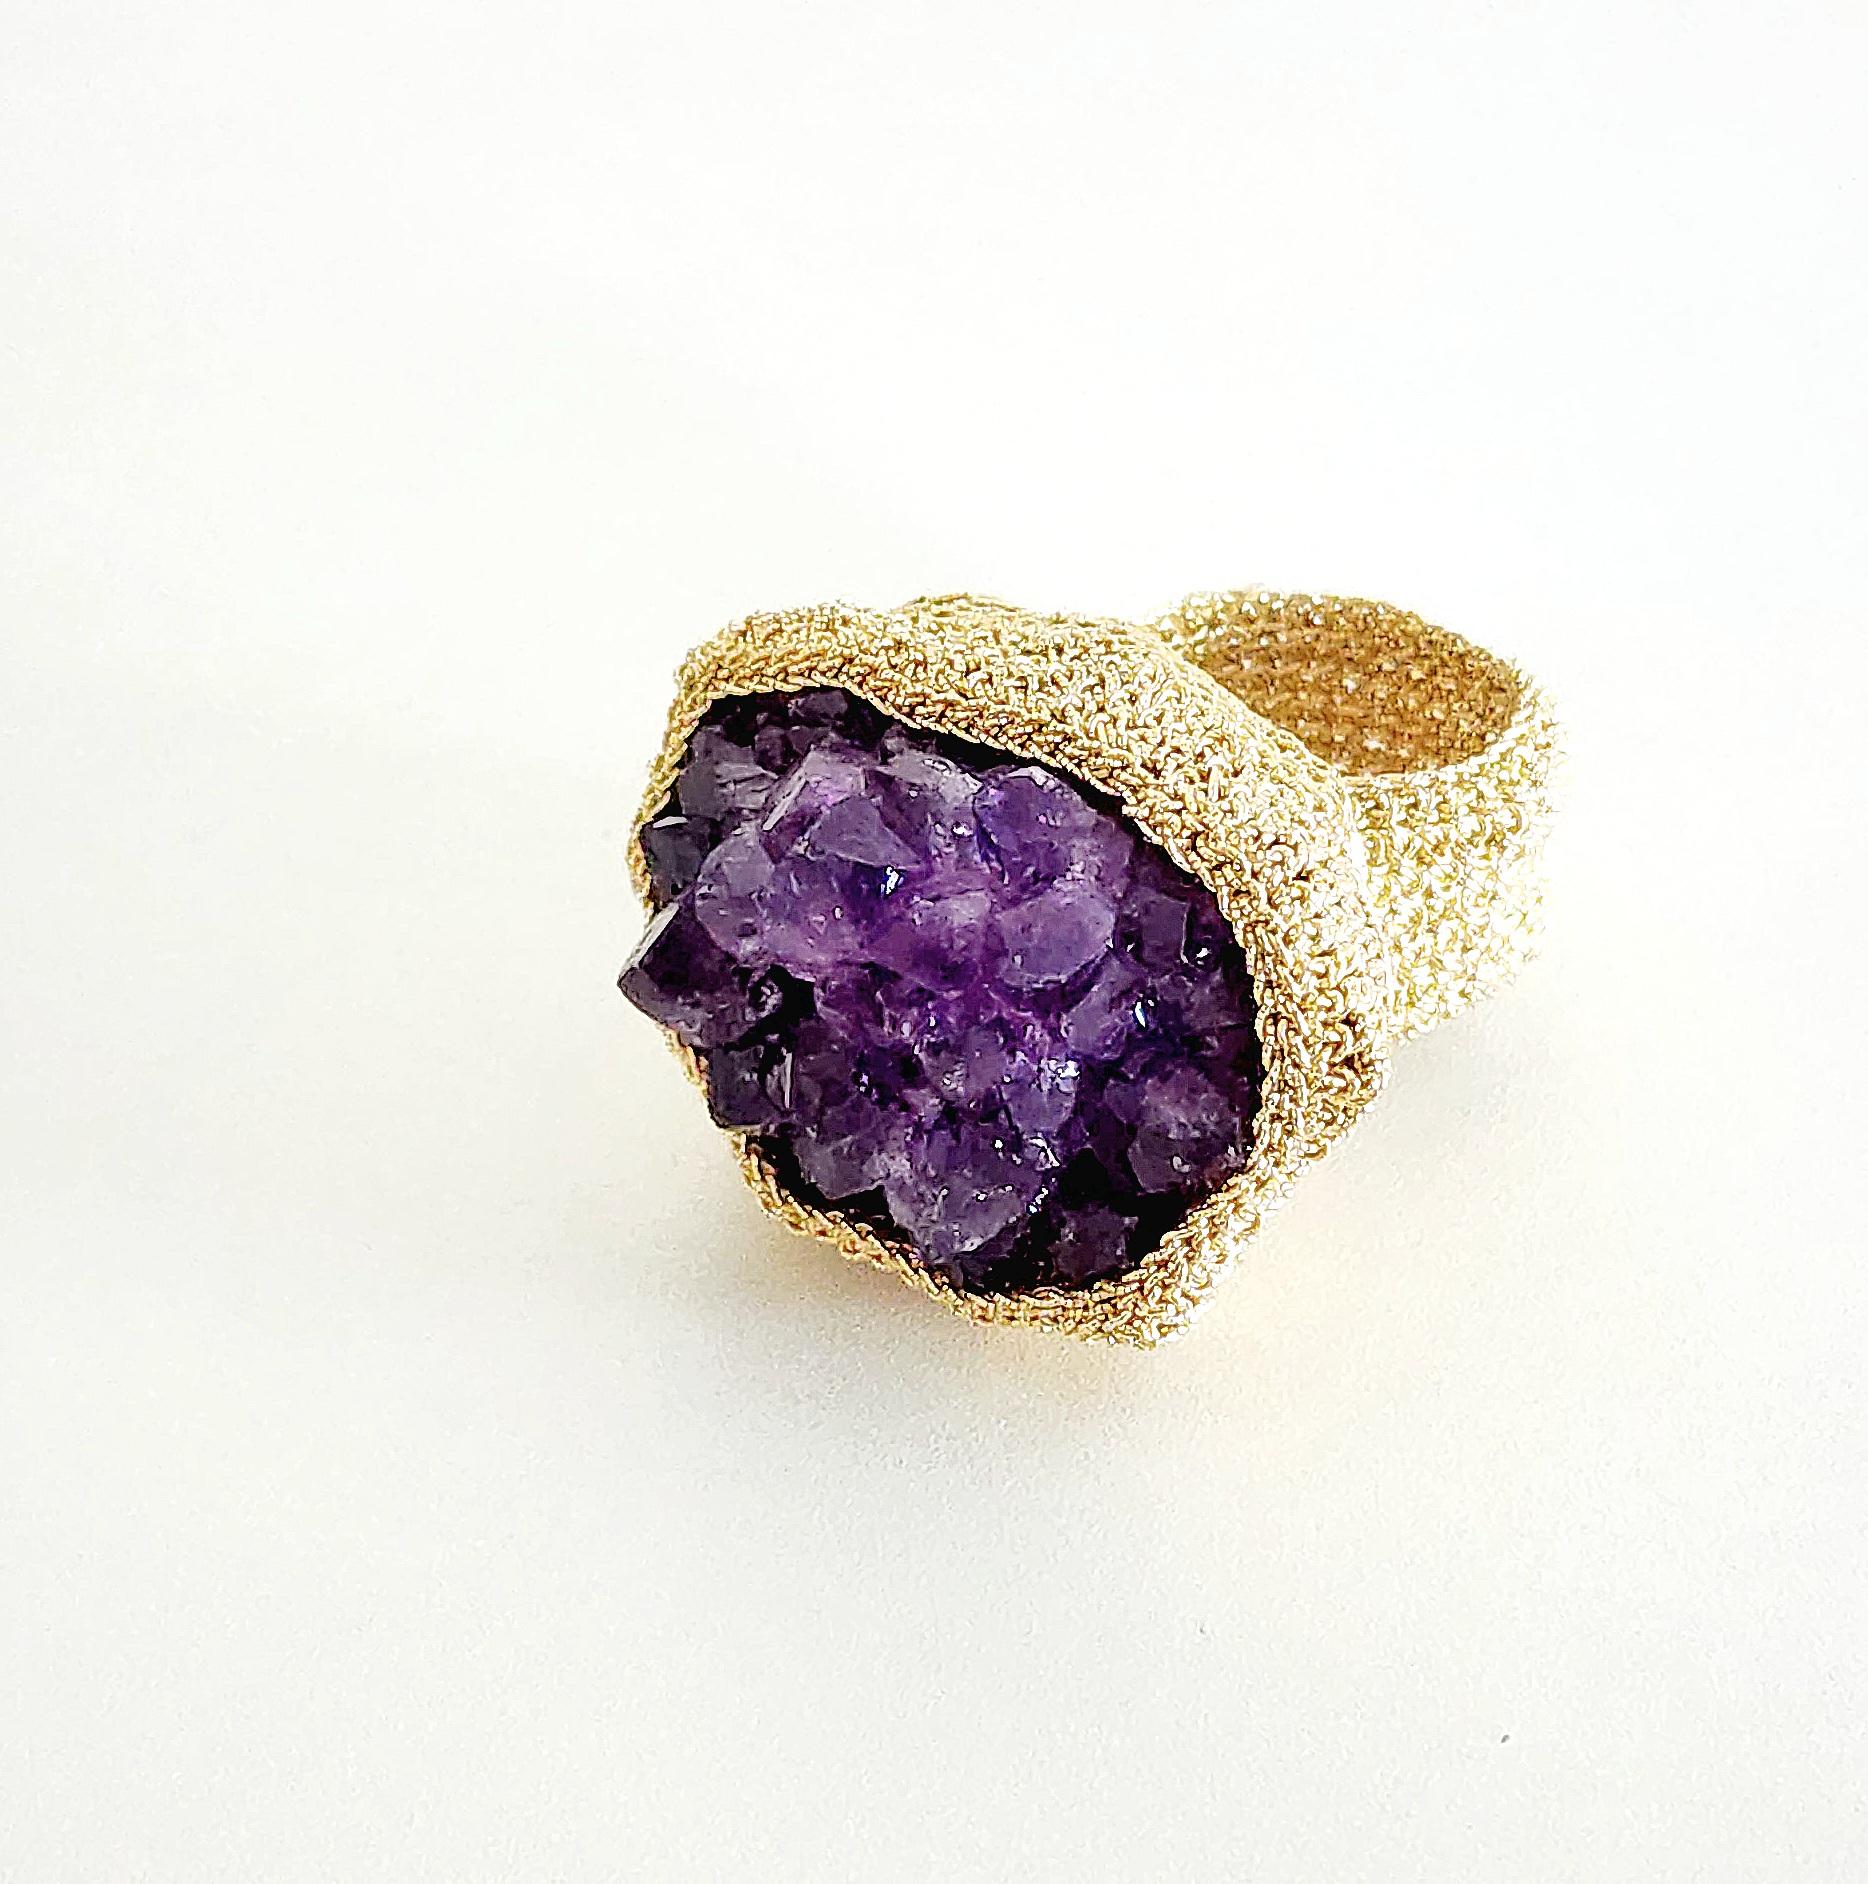 Beautiful, one of a kind crochet ring. It is meticulously handcrafted with 18 karat gold thread. The thread is made of an 18 karat gold wire which is flattened and wrapped around a cotton core. The stone is a beautiful dark rough cut druze Amethyst.